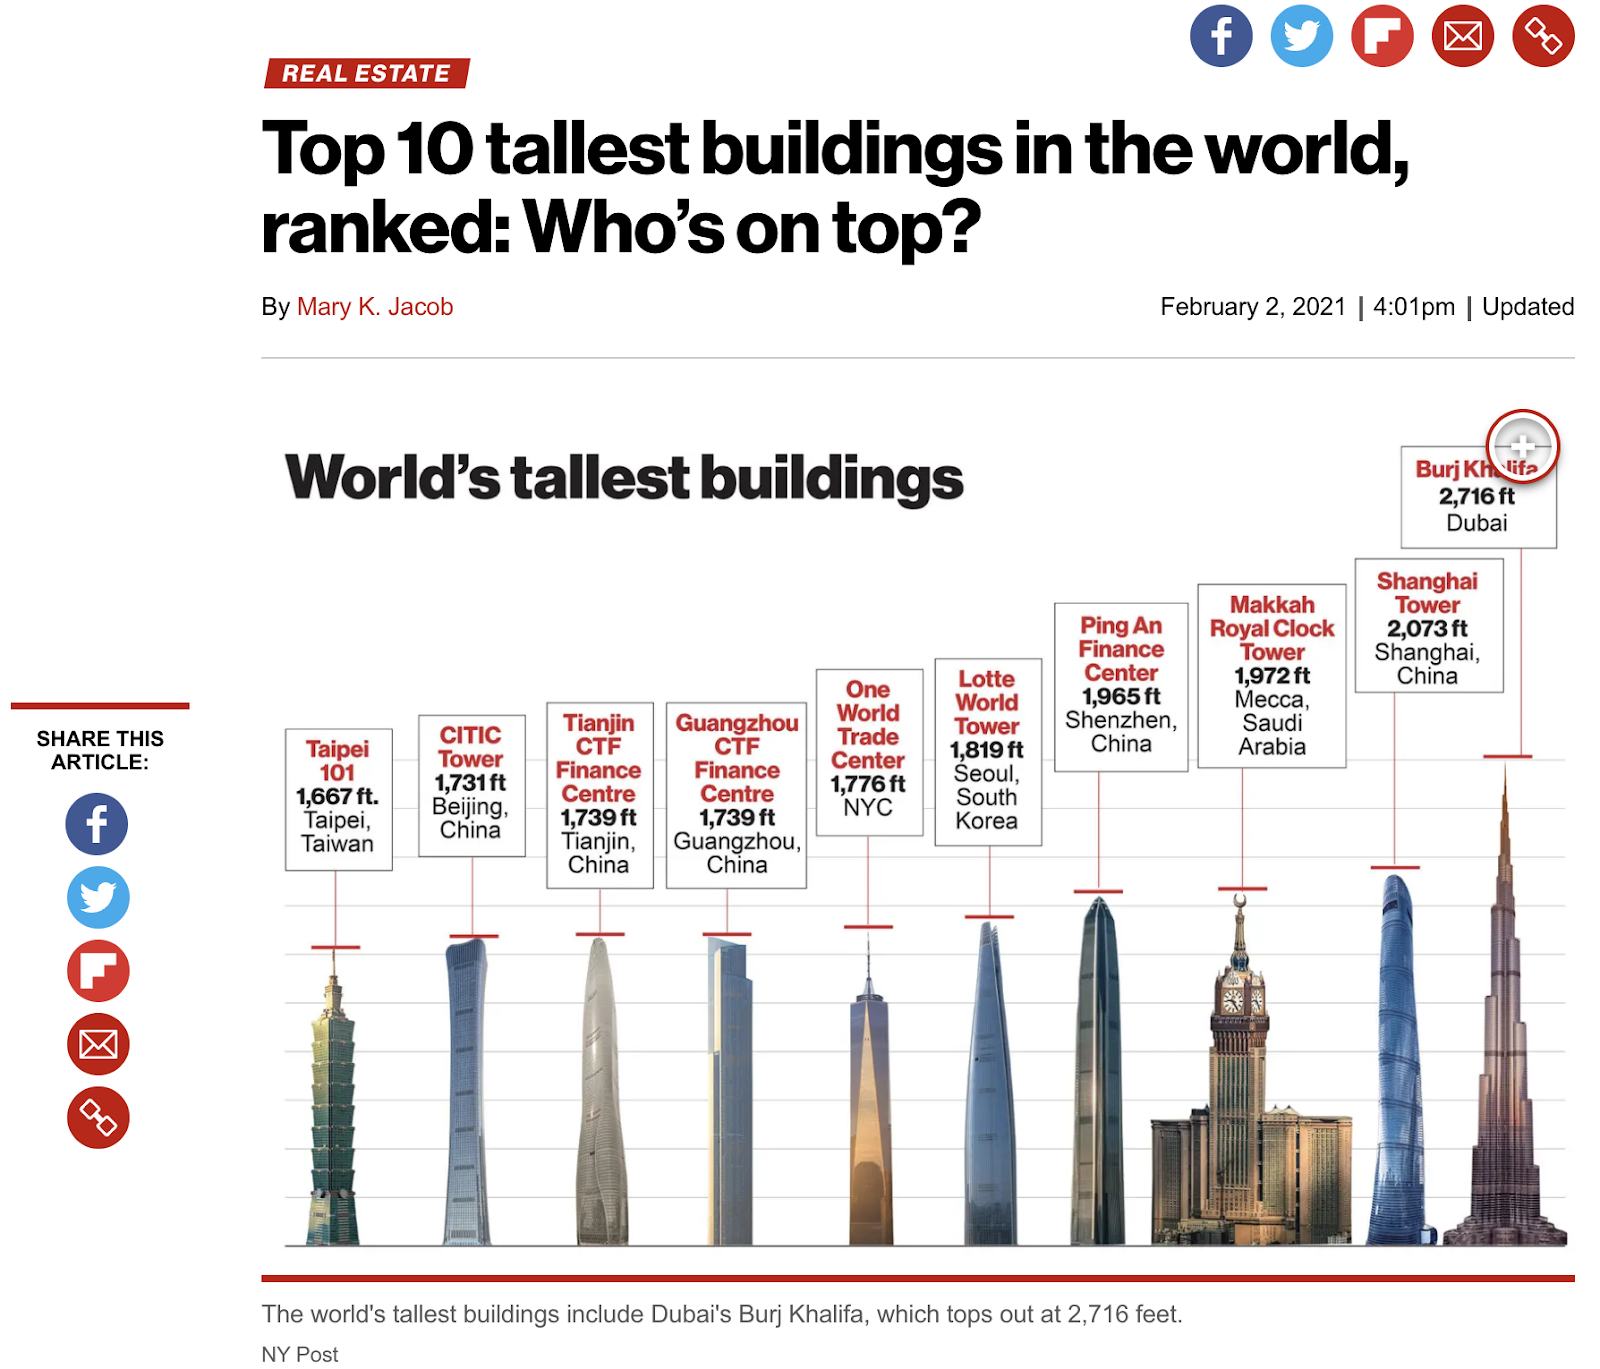 How to Use Data in Content Creation: New York post showing the scale of tallest buildings in the world